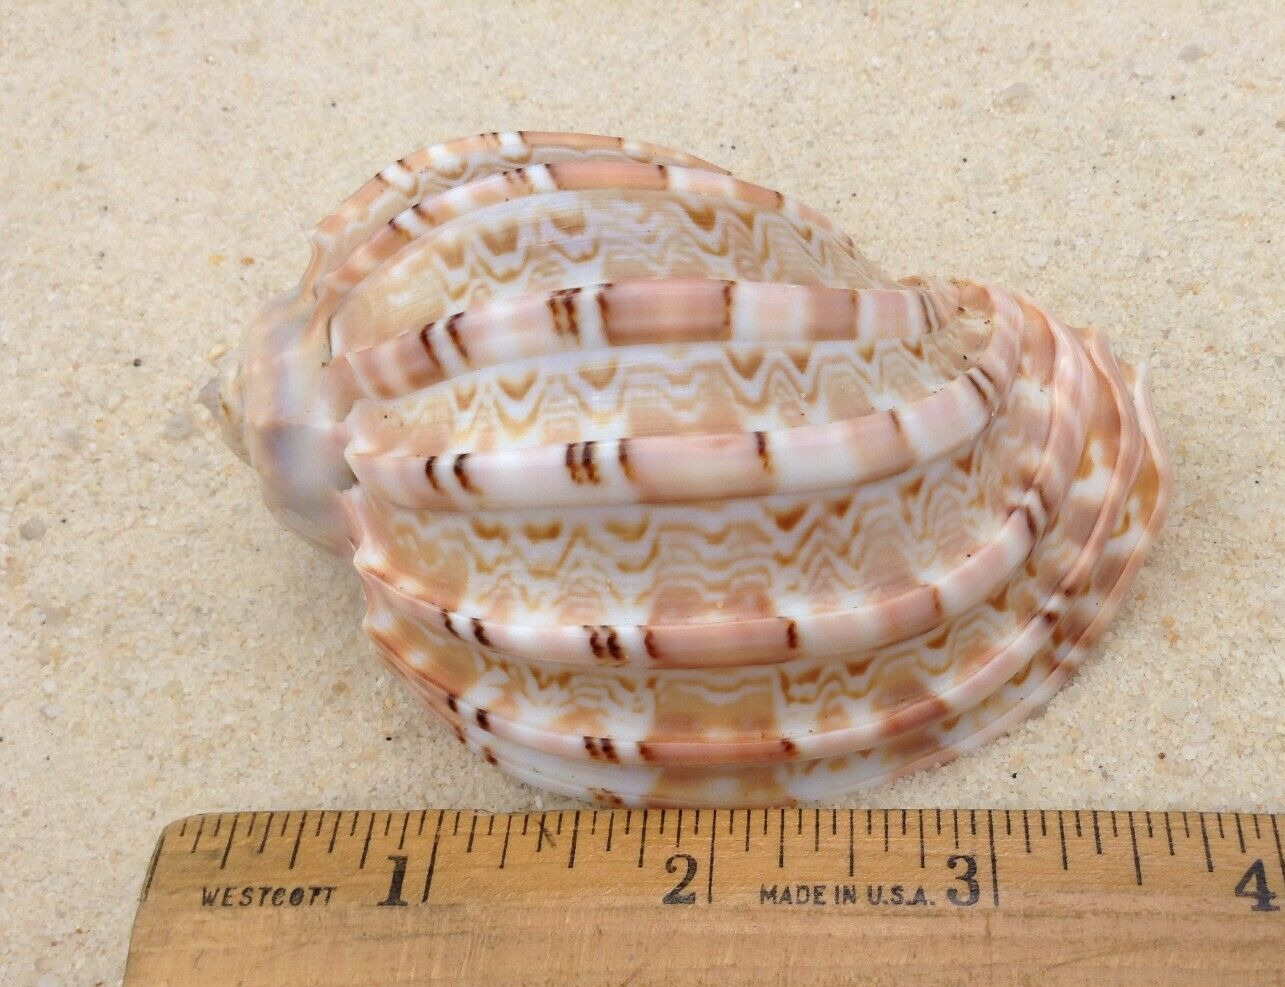 Harpa species harp shell salmon, cream, & brown color & pattern 85 mm 3 1/2\